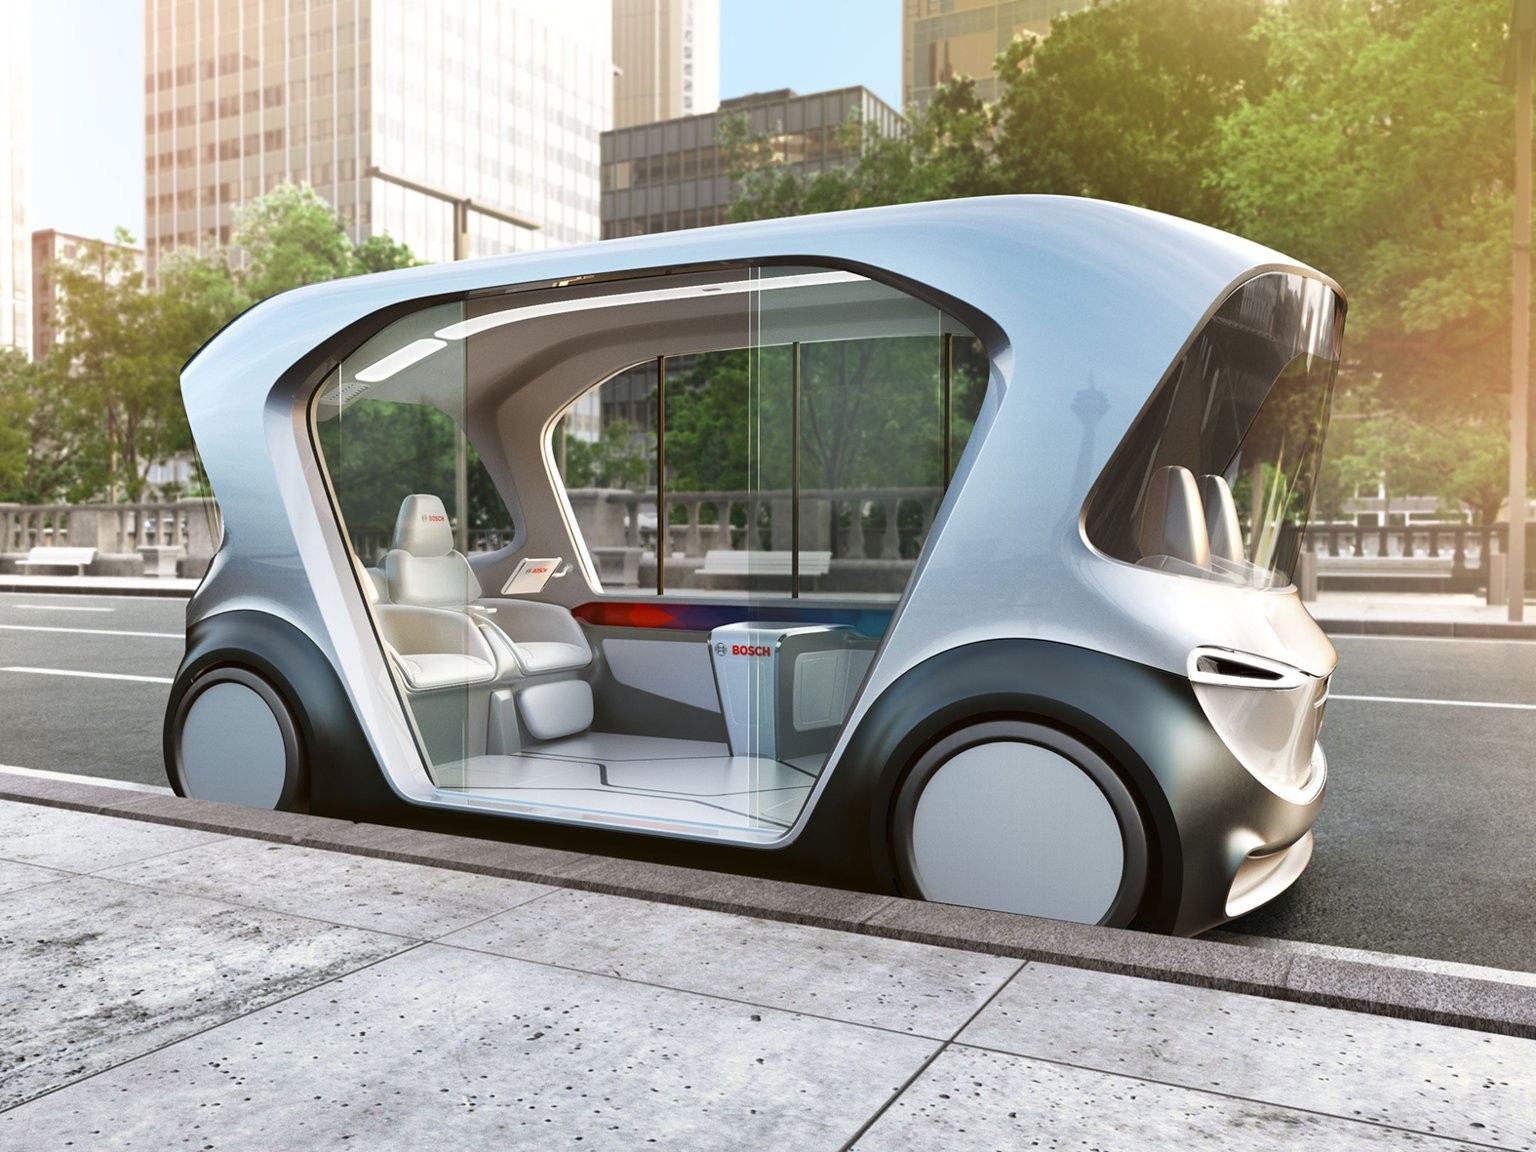 Bosch will present a concept model for its planned autonomous shuttle to the International Consumer Electronics Show, which starts on Tuesday in Las Vegas. Photo: Bosch